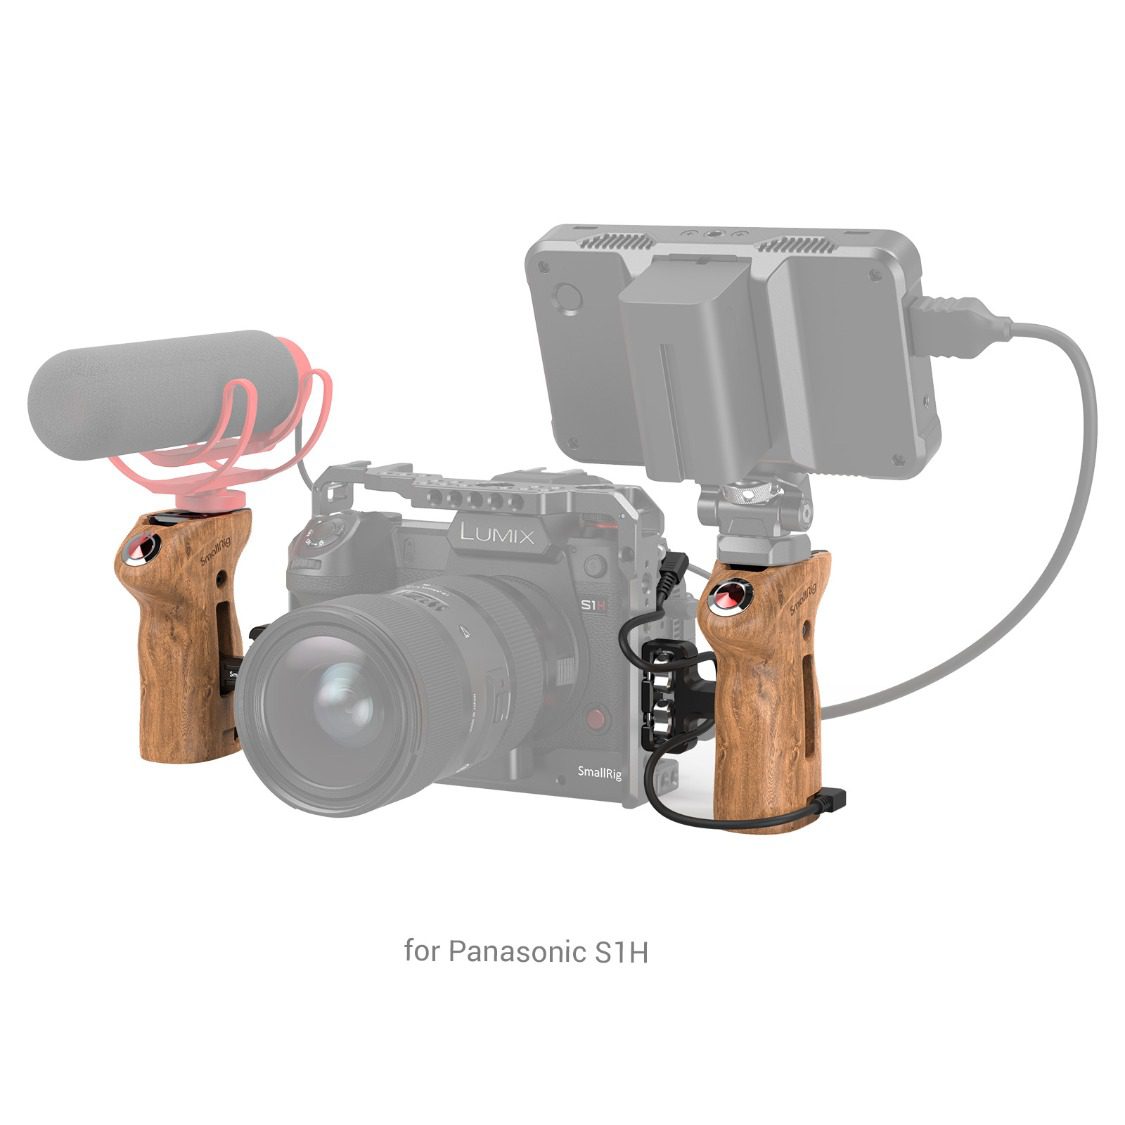 SmallRig Side Handle with Remote Trigger for Panasonic and Fujifilm Mirrorless Cameras 2934